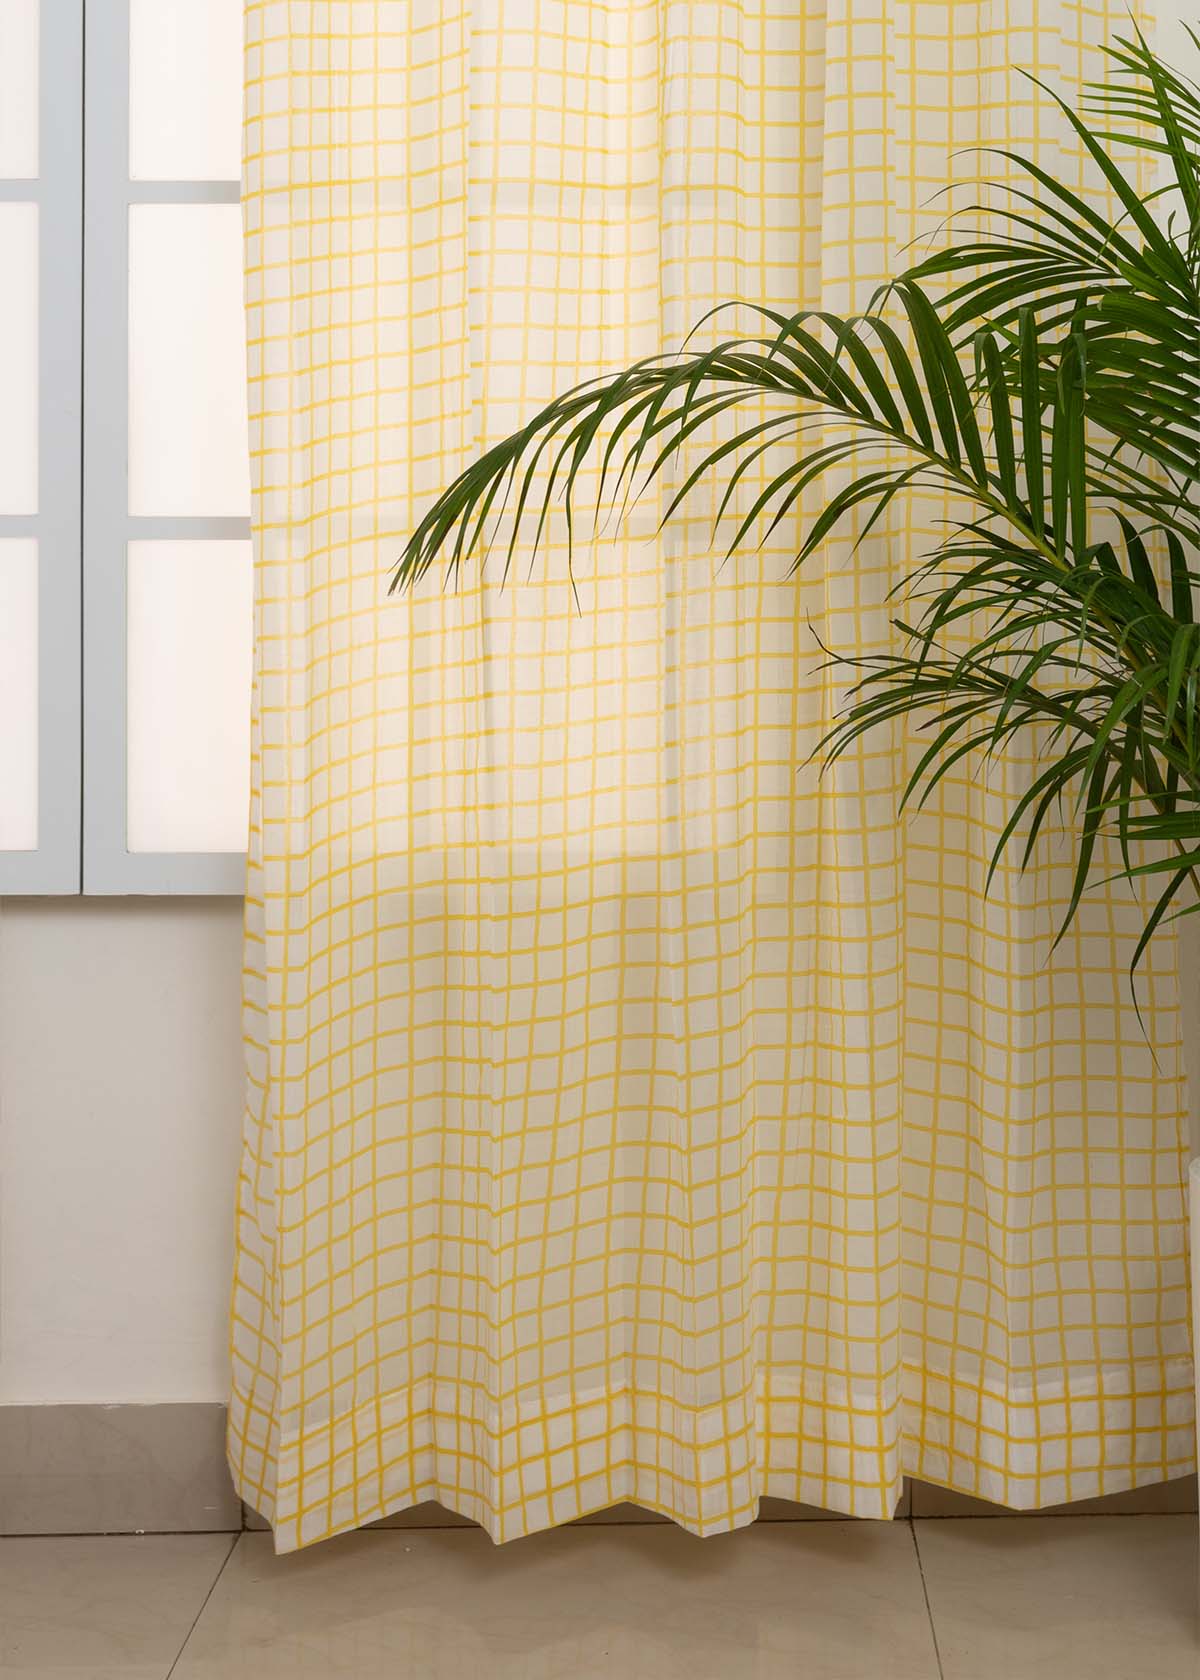 Uneven Checks Geometric 100% Customizable Cotton Sheer curtain for Living room & bedroom - Light filtering - Yellow